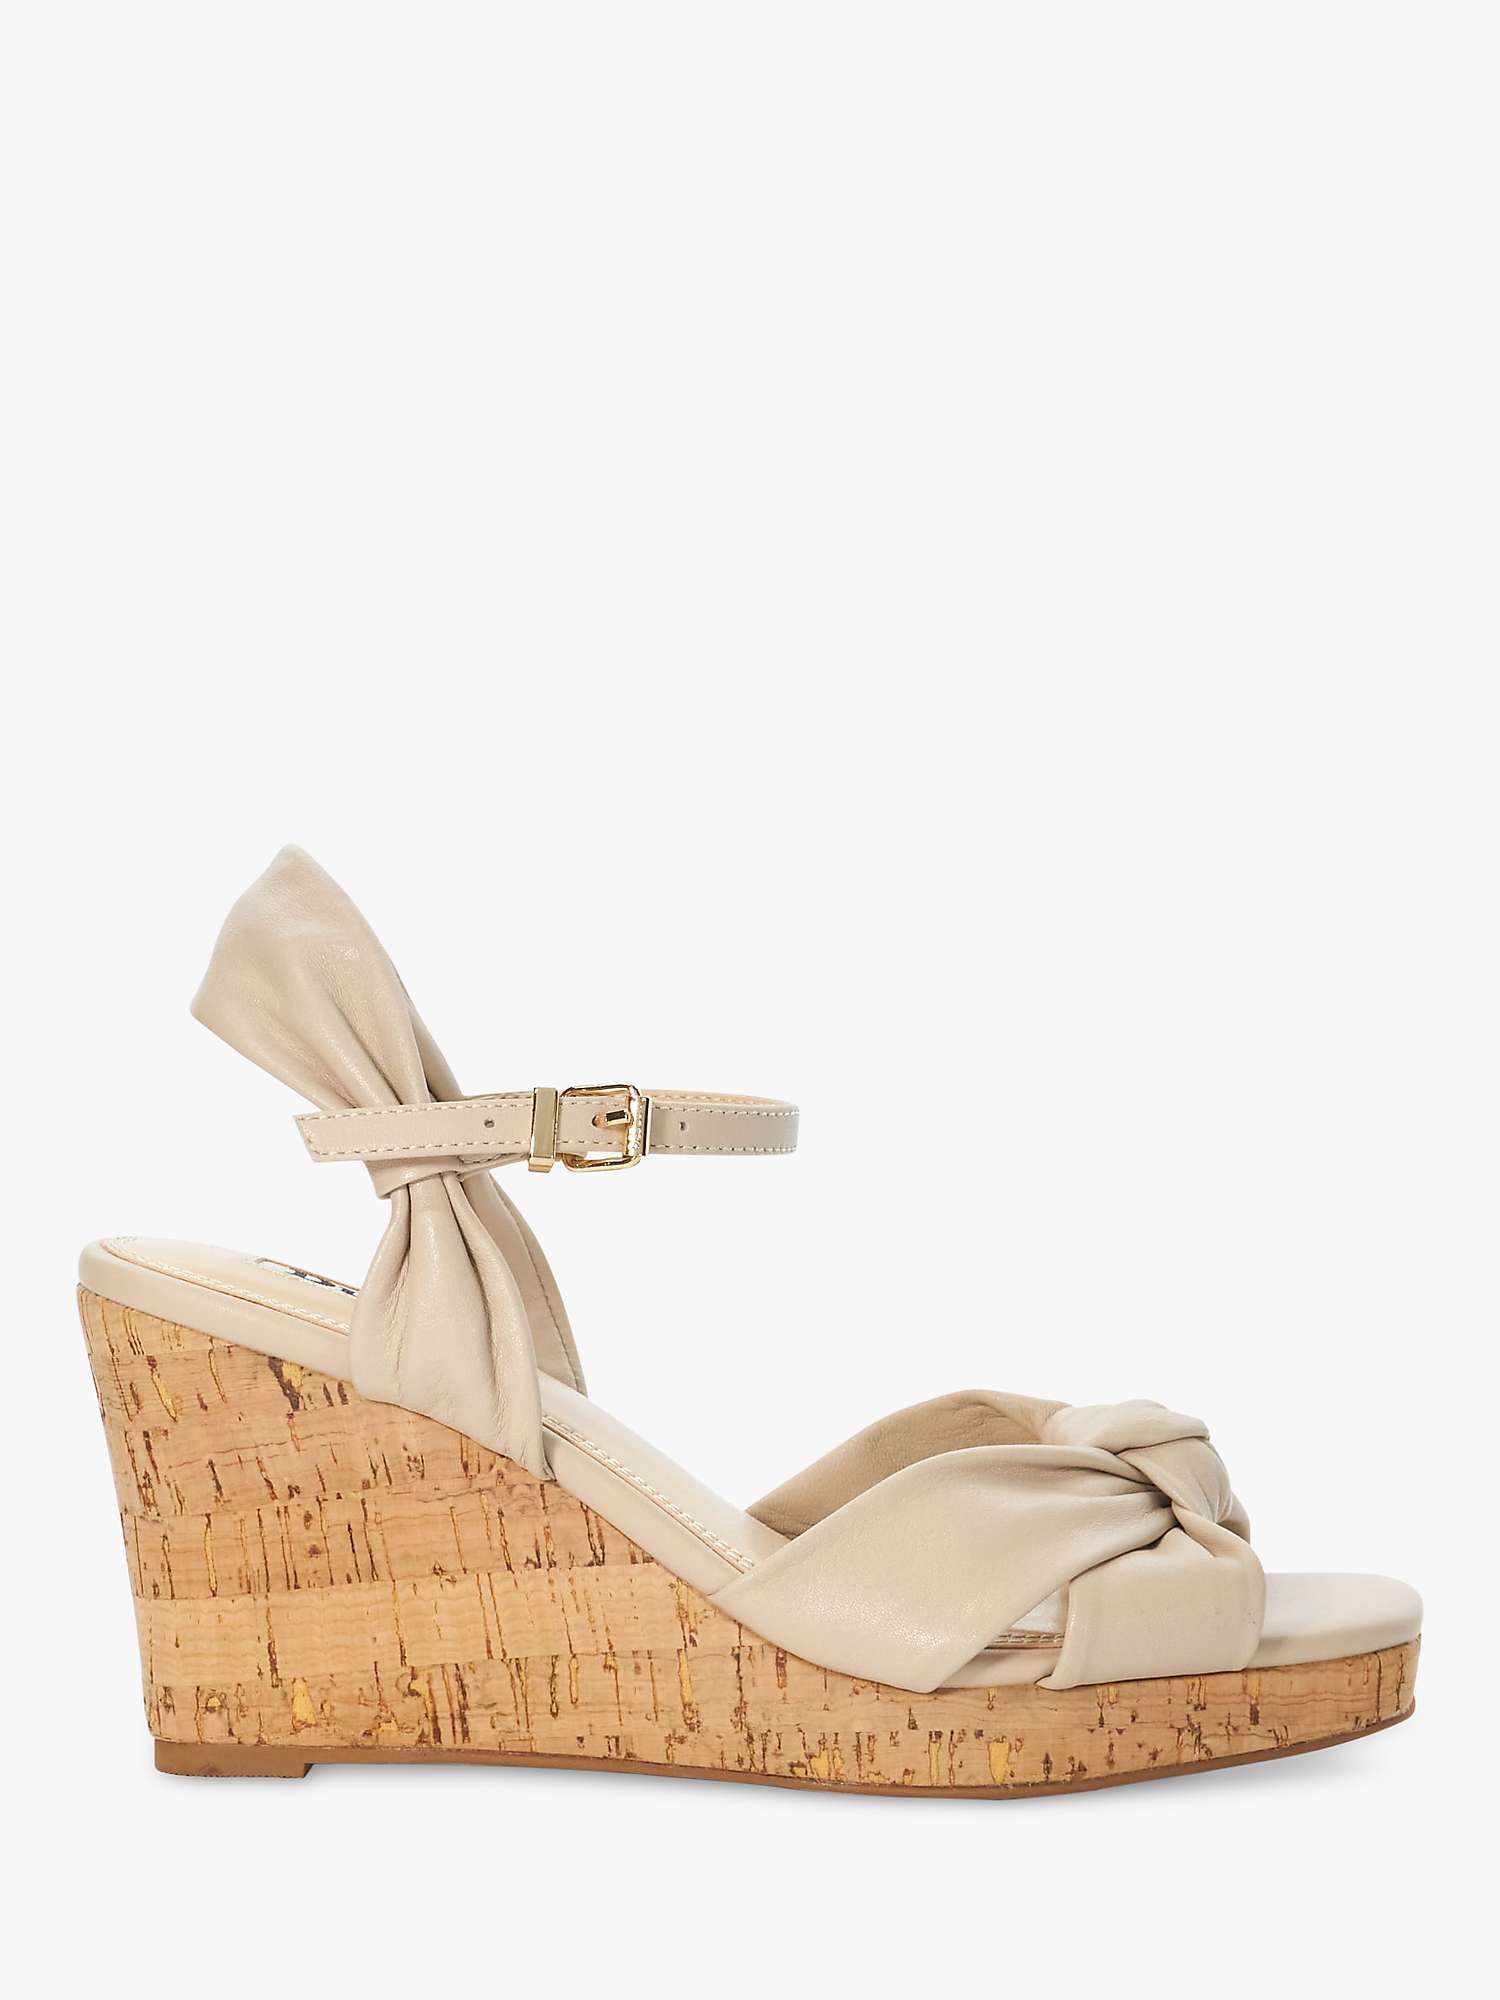 Buy Dune Kaino Leather Knotted Wedge Sandals, Ecru Online at johnlewis.com